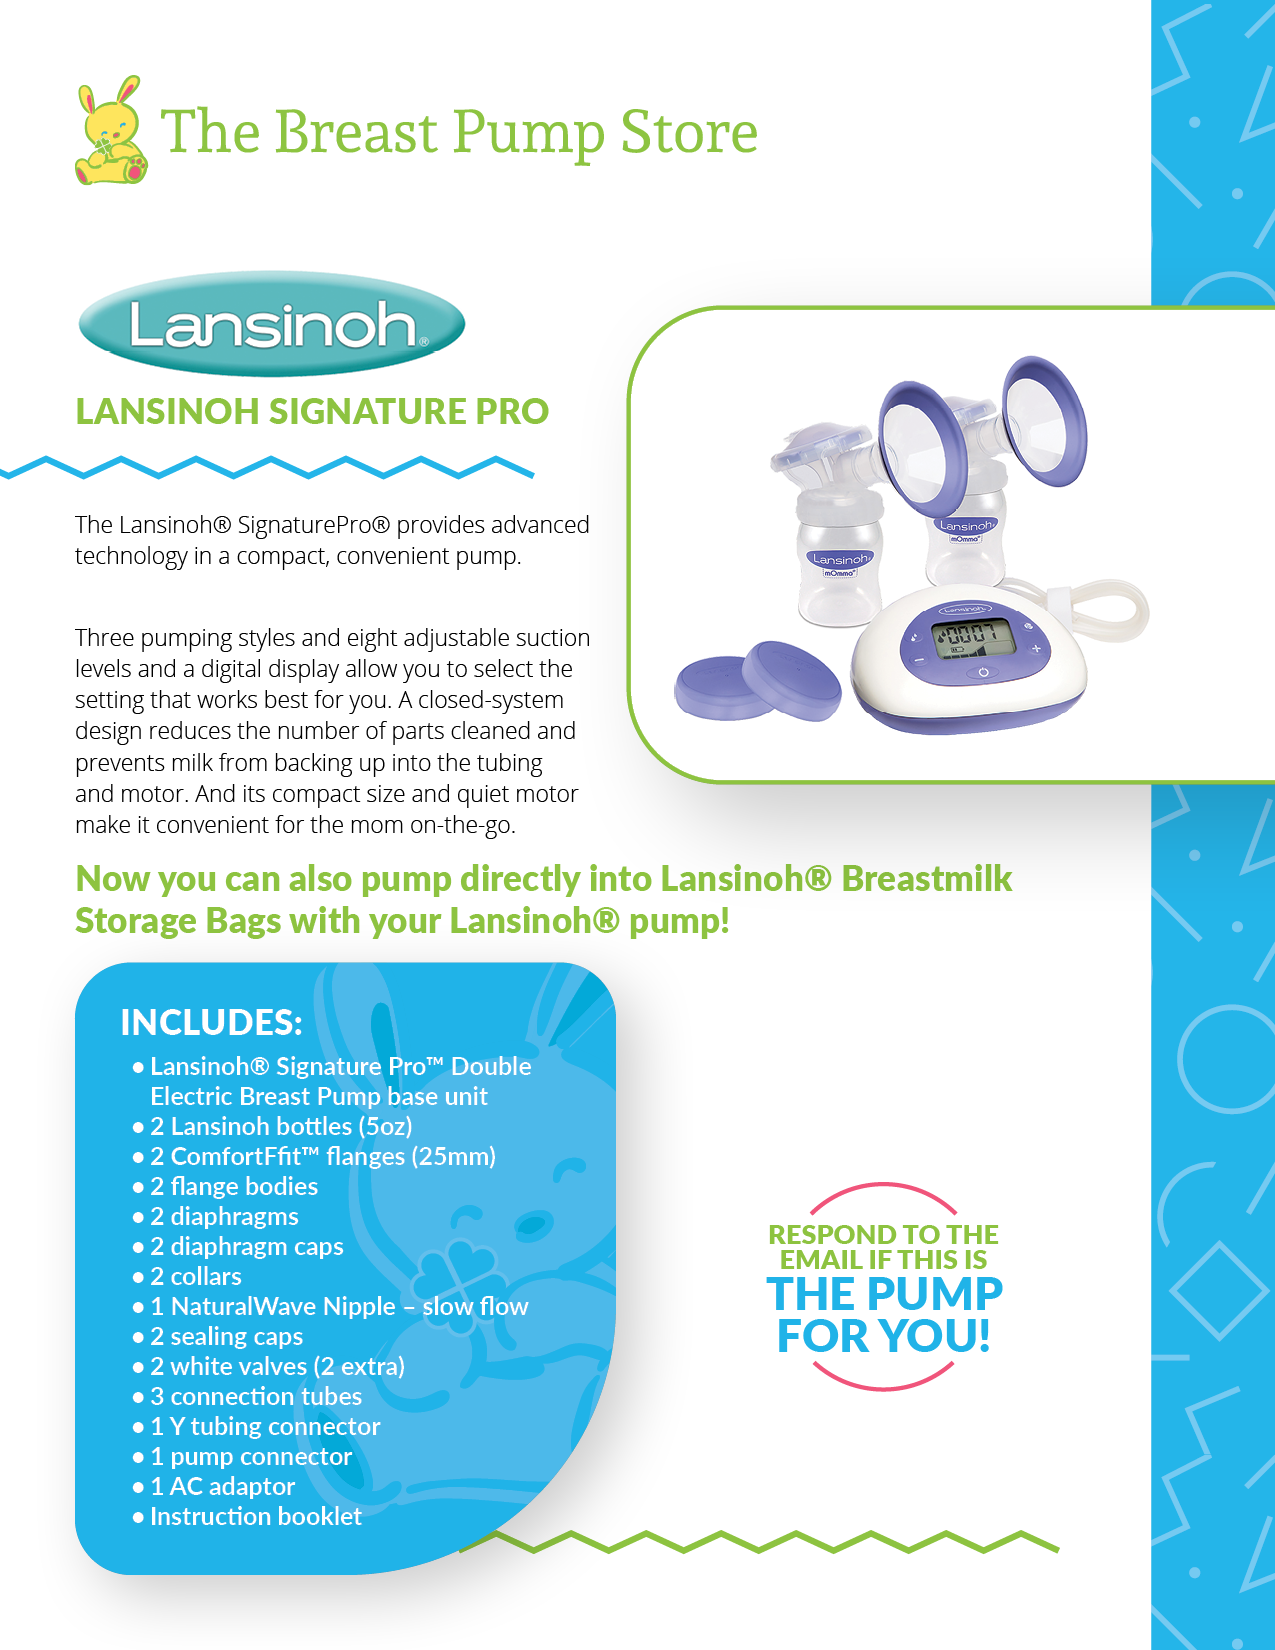 Review: Lansinoh Signature Pro Double Electric Breast Pump